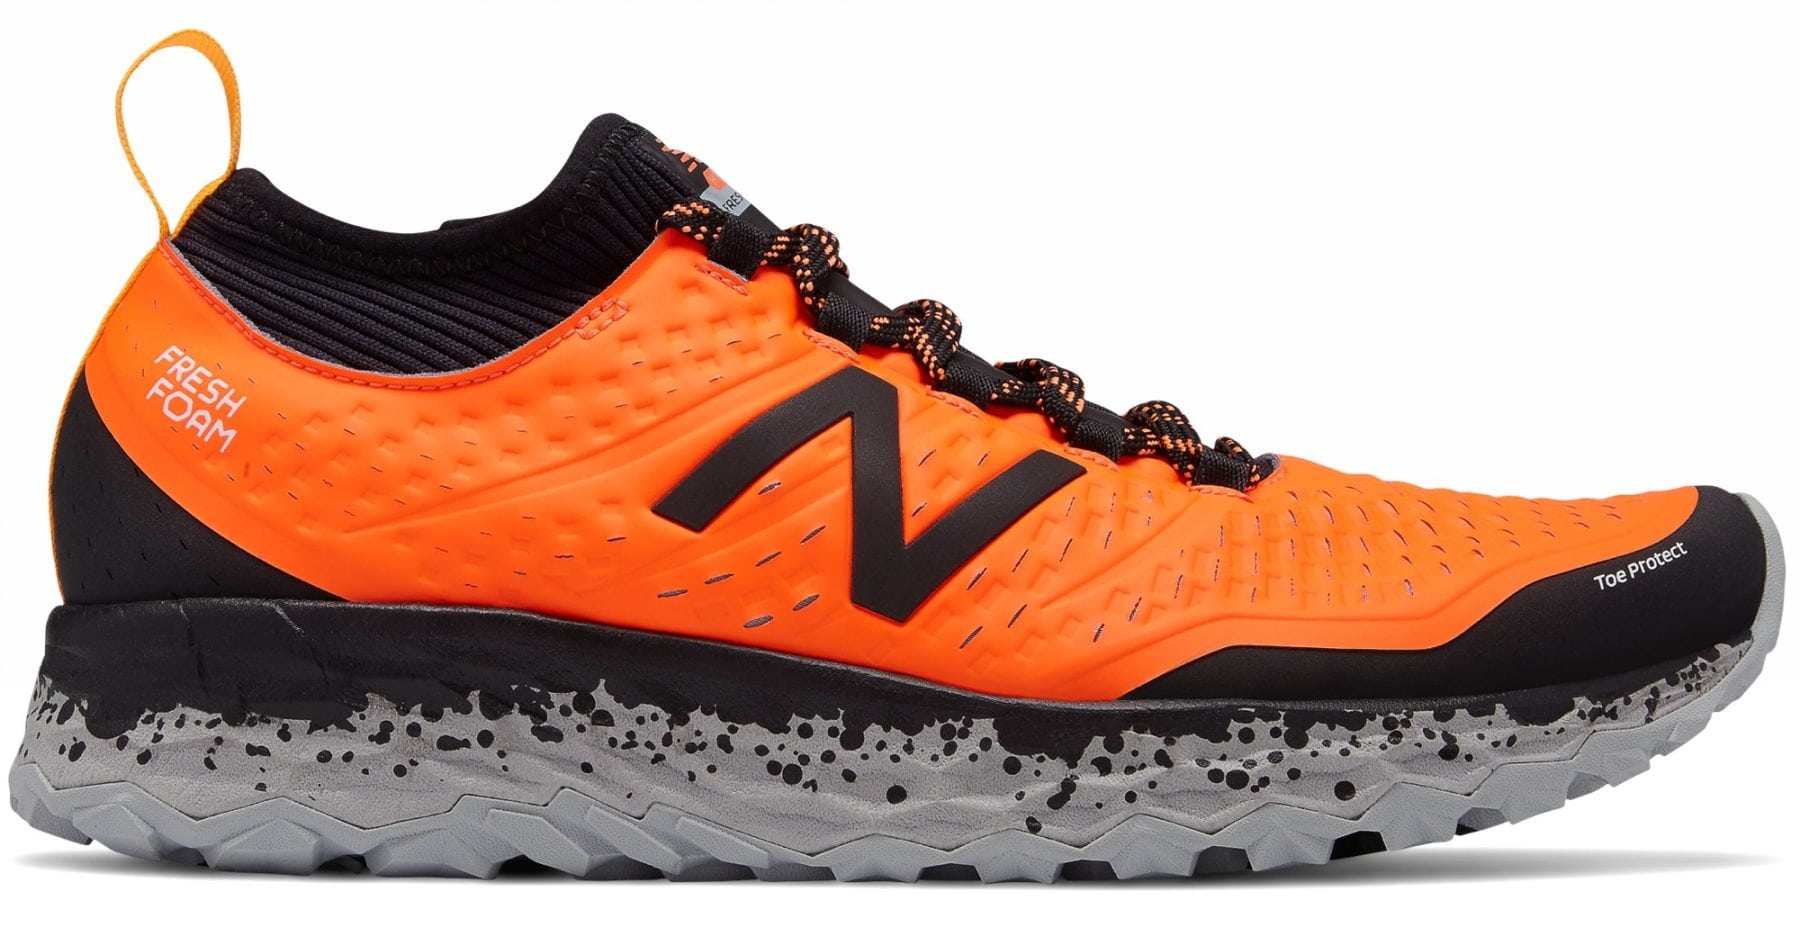 Best New Trail Shoes for Spring-Summer 